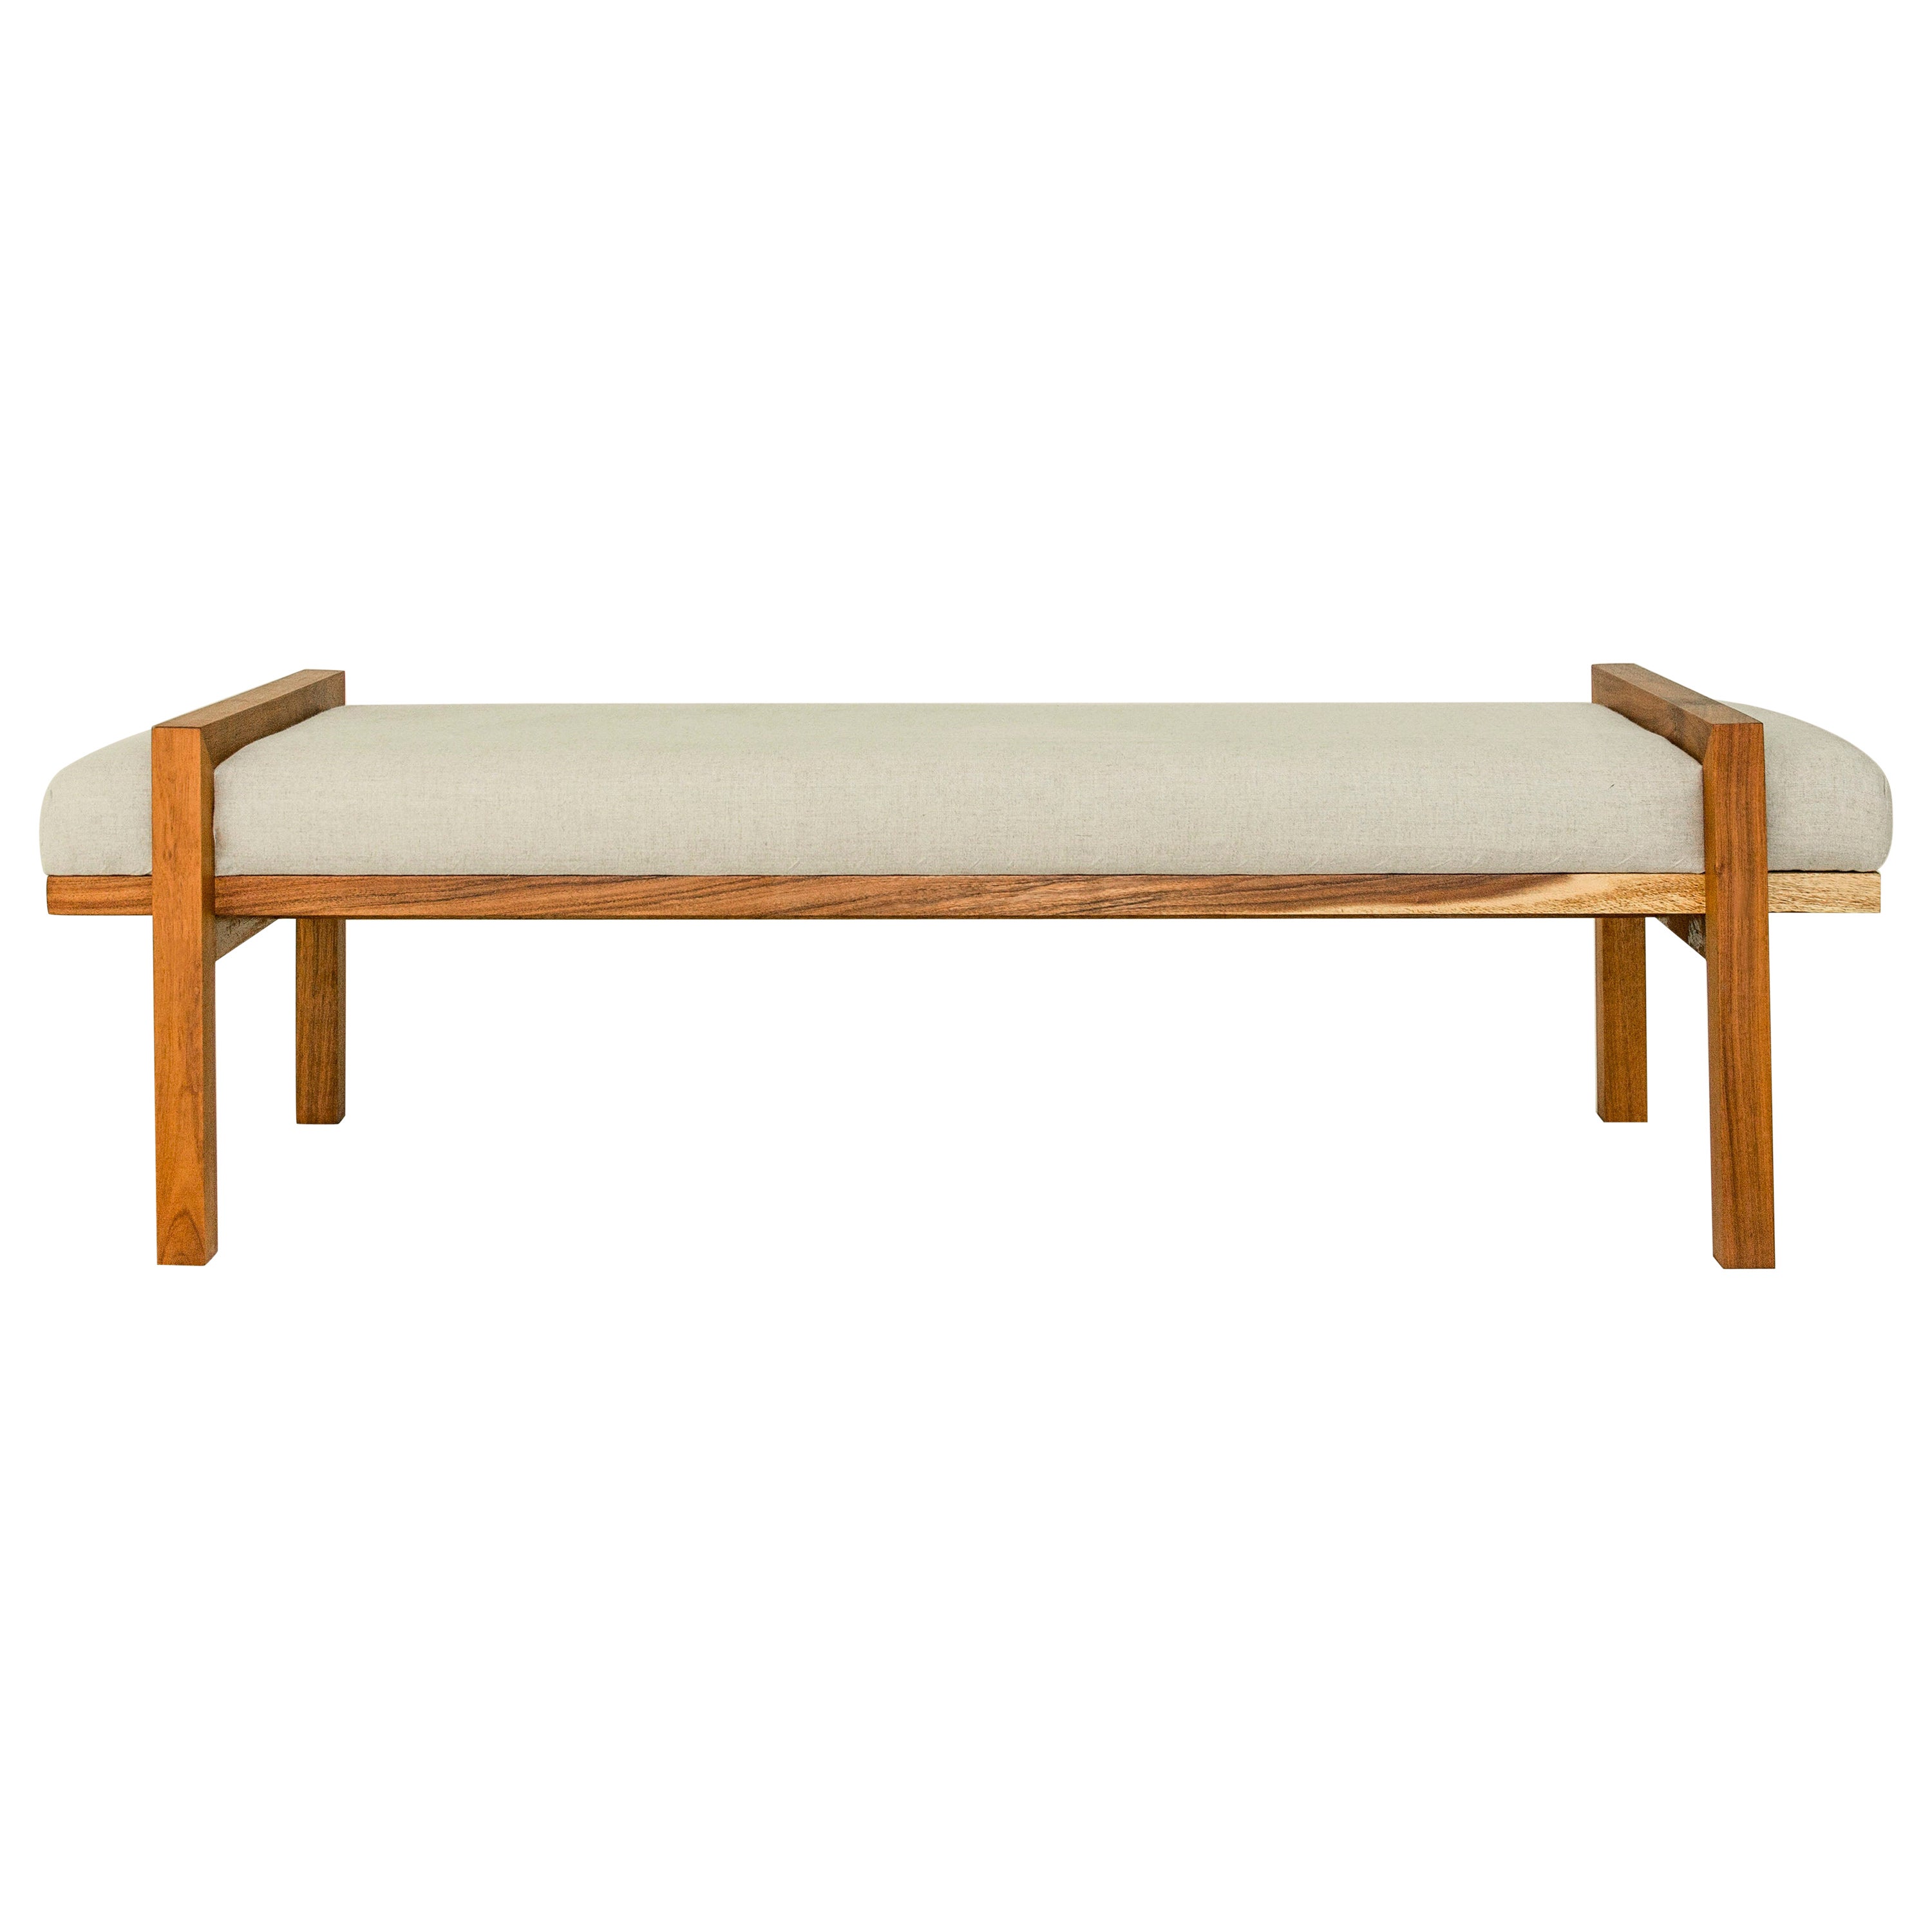 Nara Bench Made in Tzalam Wood and Linen Upholstery by Tana Karei For Sale